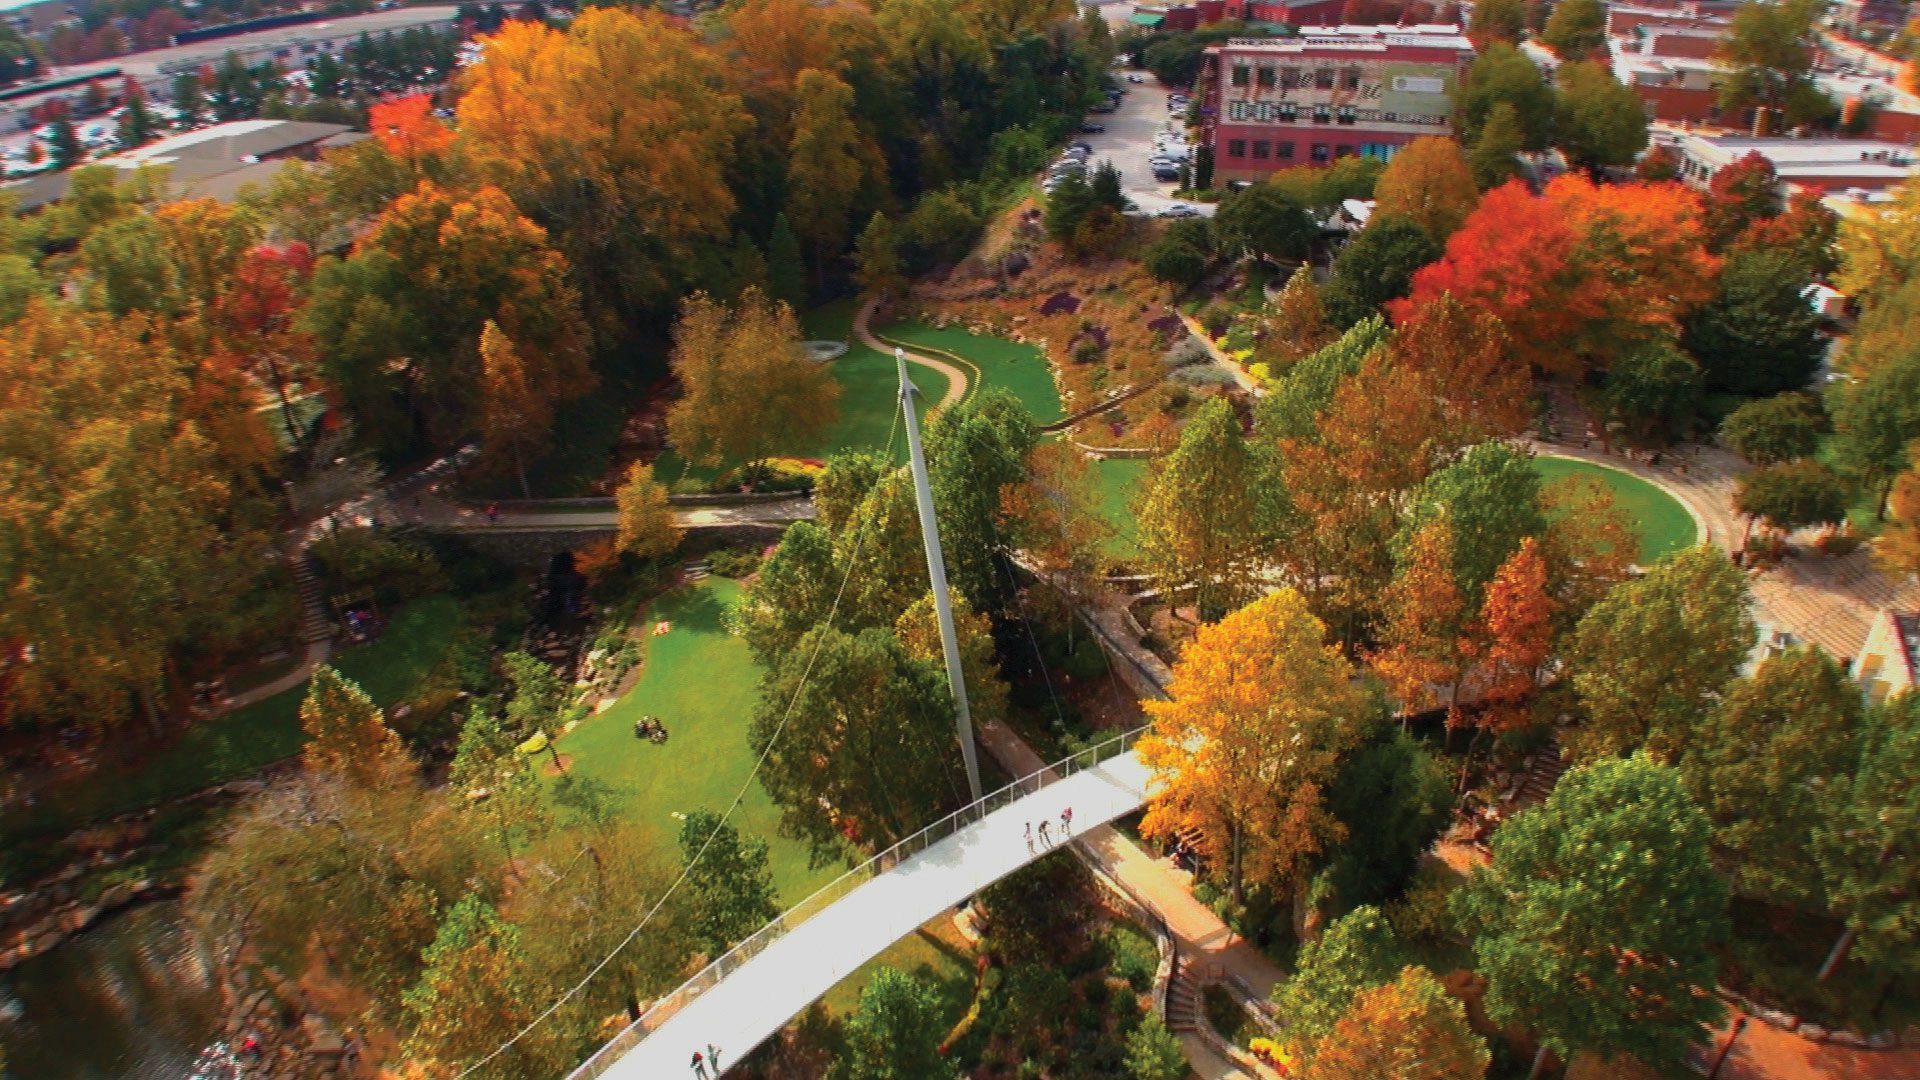 Bird's eye view of Liberty Bridge in the midst of fall in Greenville